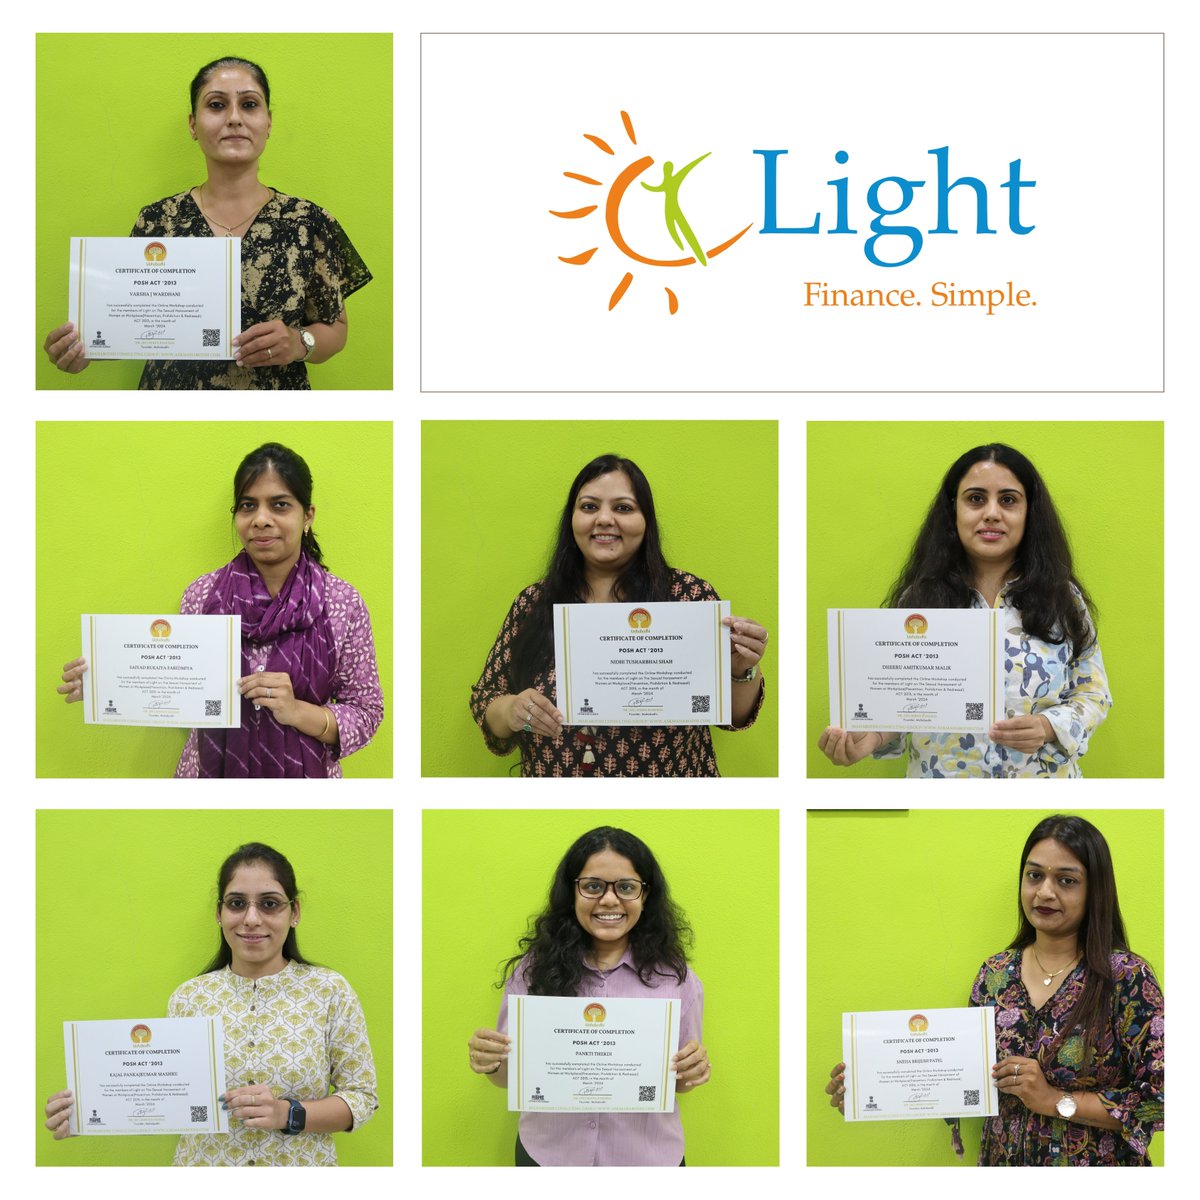 Our team completed POSH training to build a safe, inclusive work environment for all. #LightCulture #POSHTraining #RespectAtWork #LifeAtLight